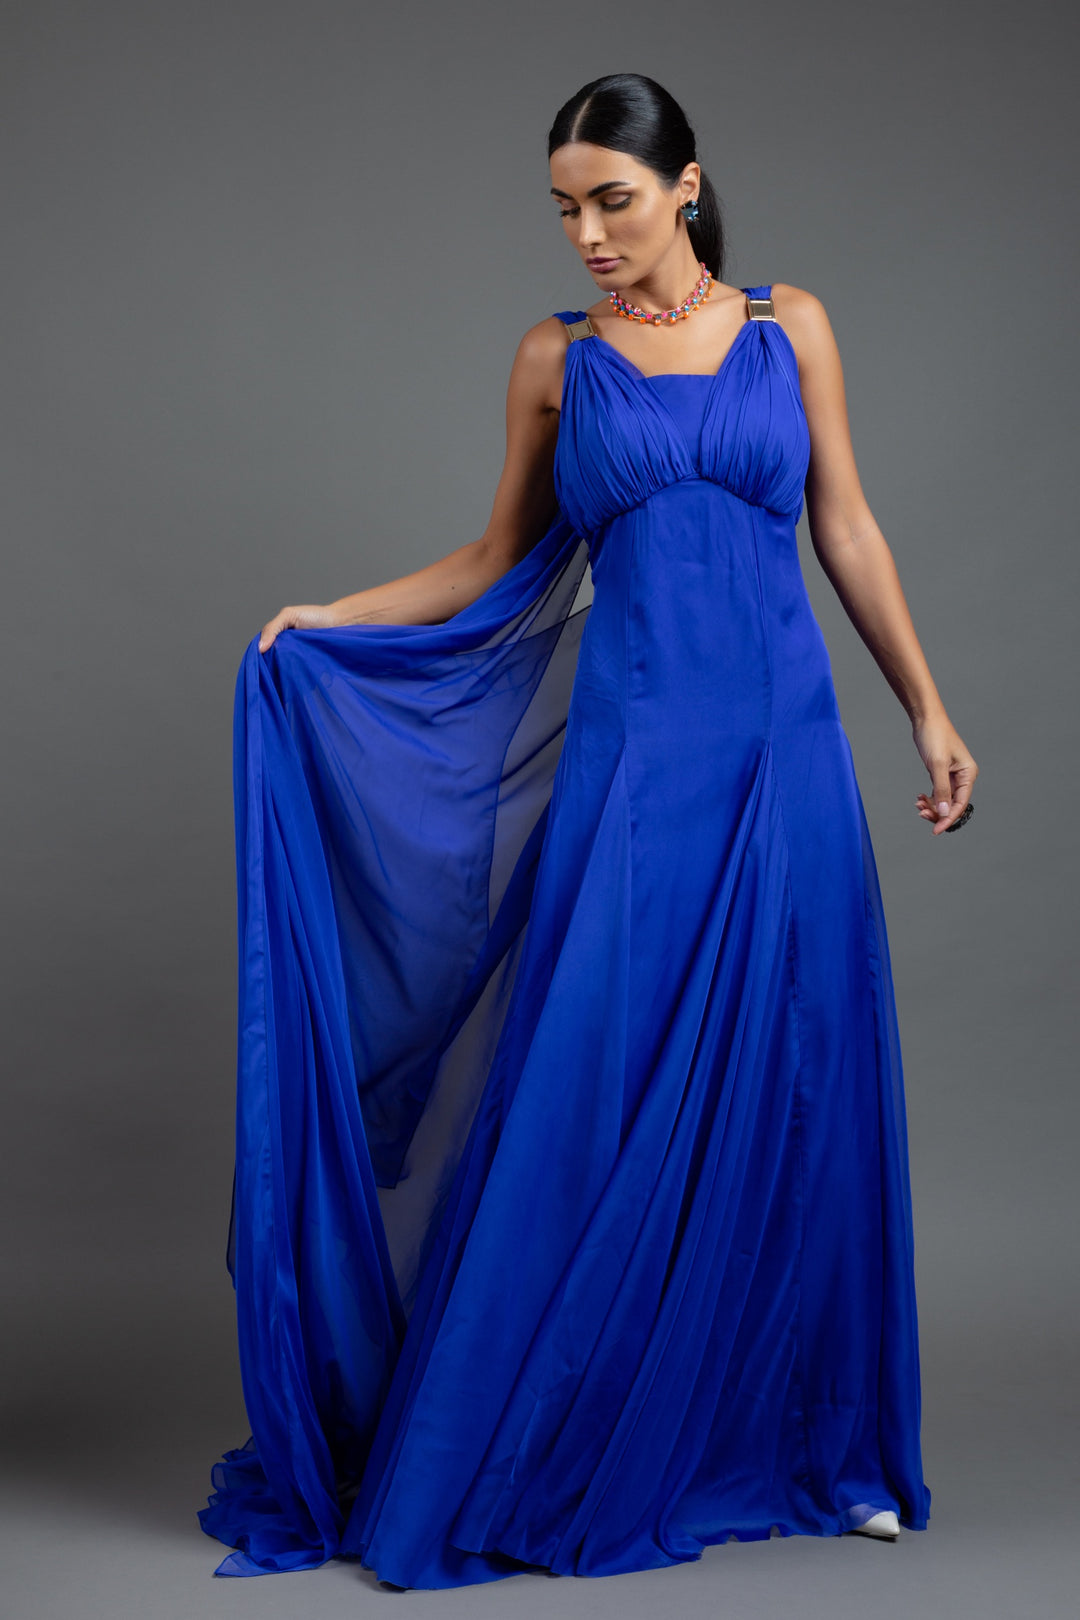 ELECTRIC BLIUE RUCHED GOWN